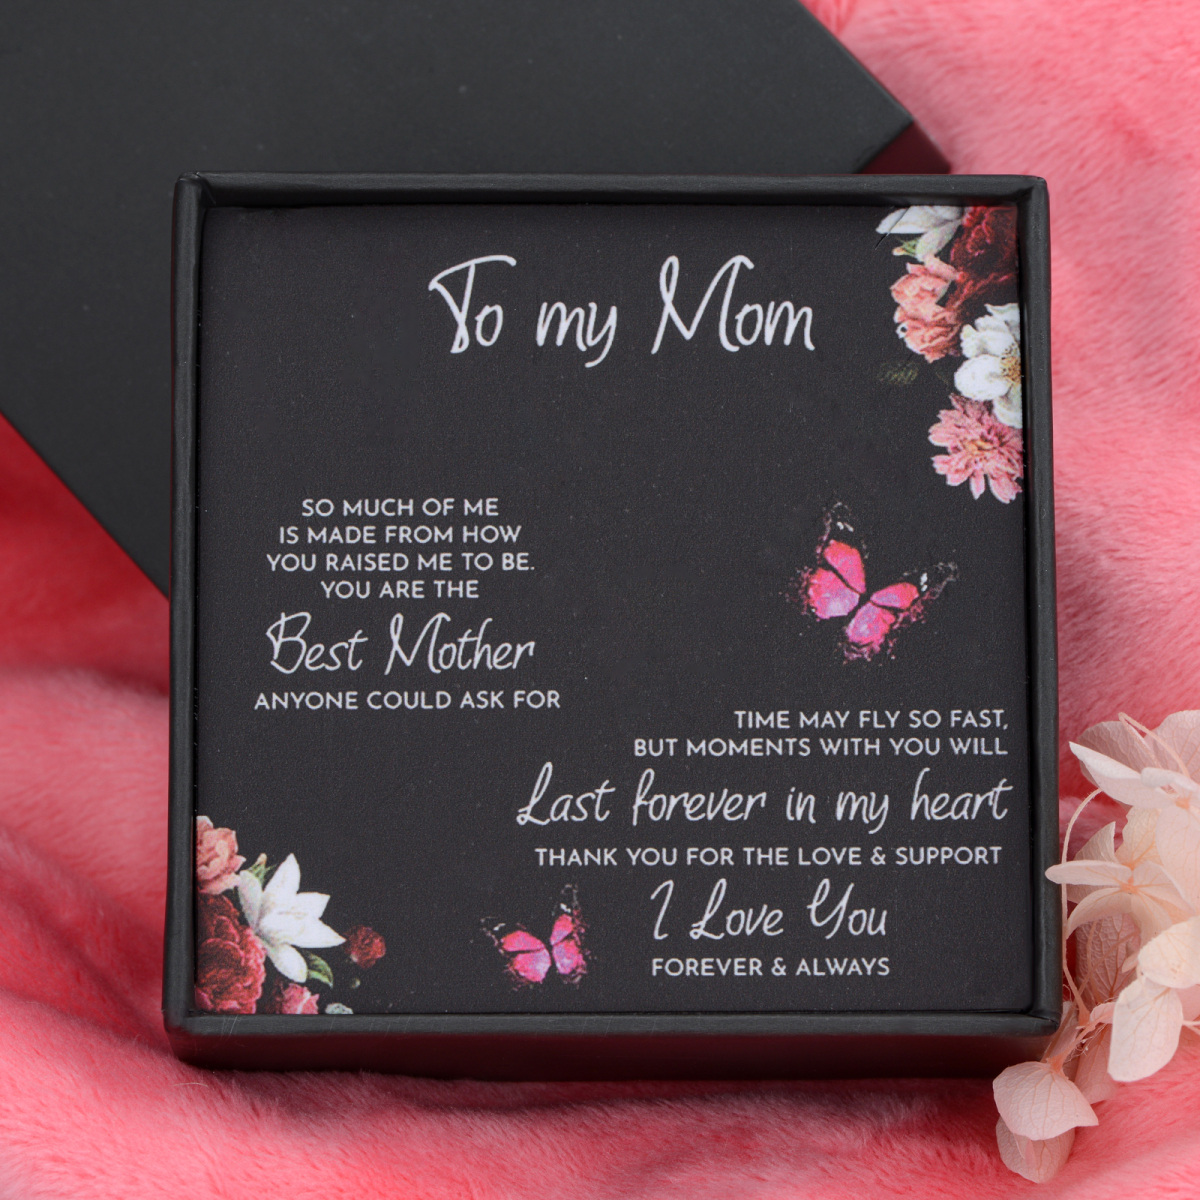 To my mom Exquisite Jewelry Box Greeting Cards Gift Cards for Her-1